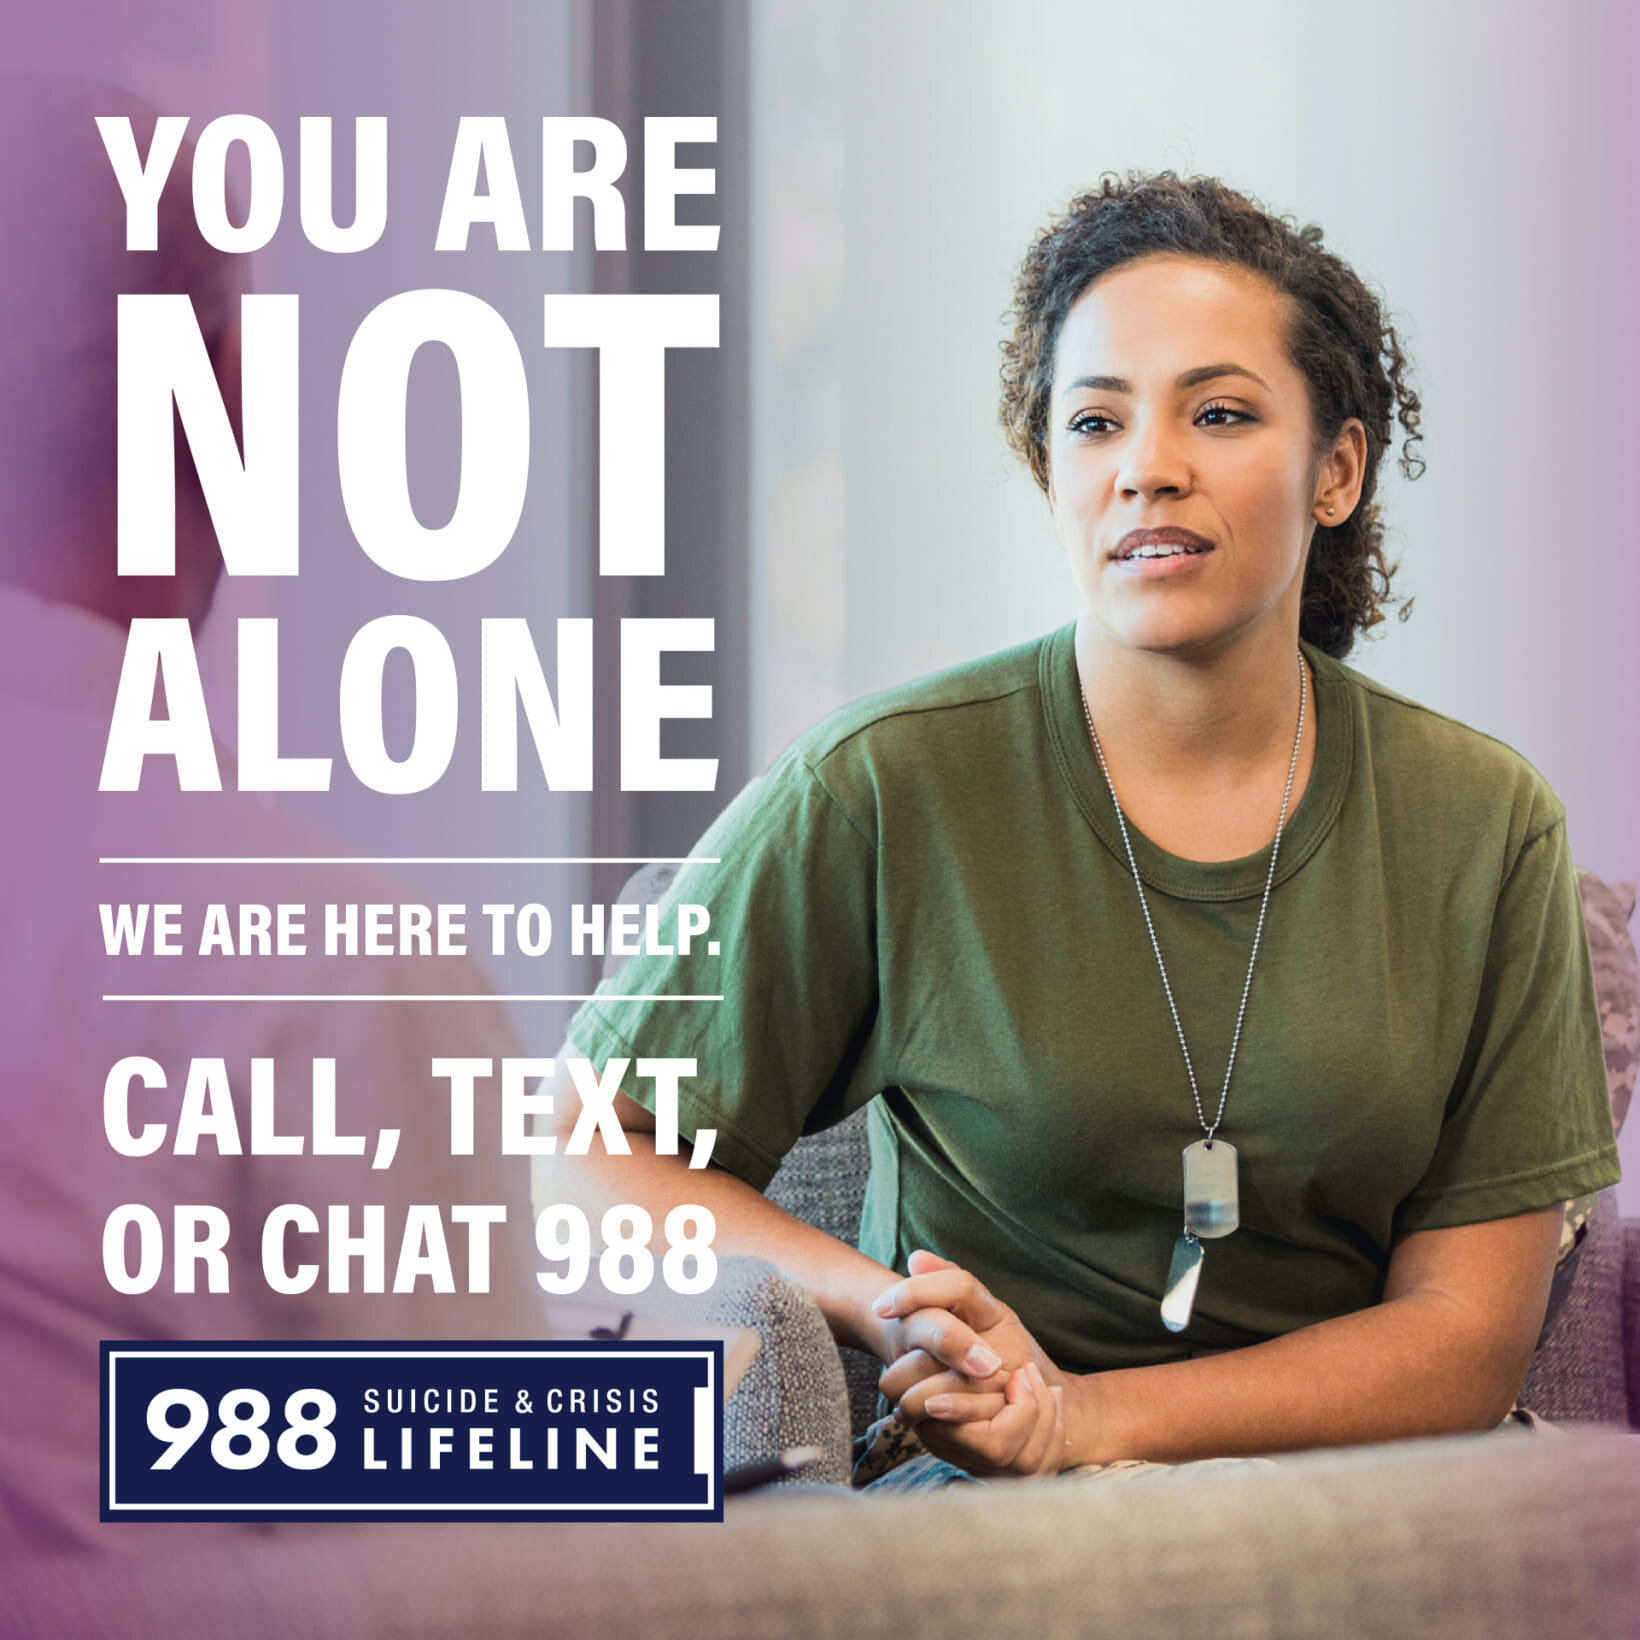 When life gets tough, it can feel overwhelming. People call, text, and chat the #988Lifeline to talk for countless reasons, including:

Thoughts of suicide
Drinking too much
Anxiety
Sexual orientation
Drug use
Feeling depressed
Mental and physical il